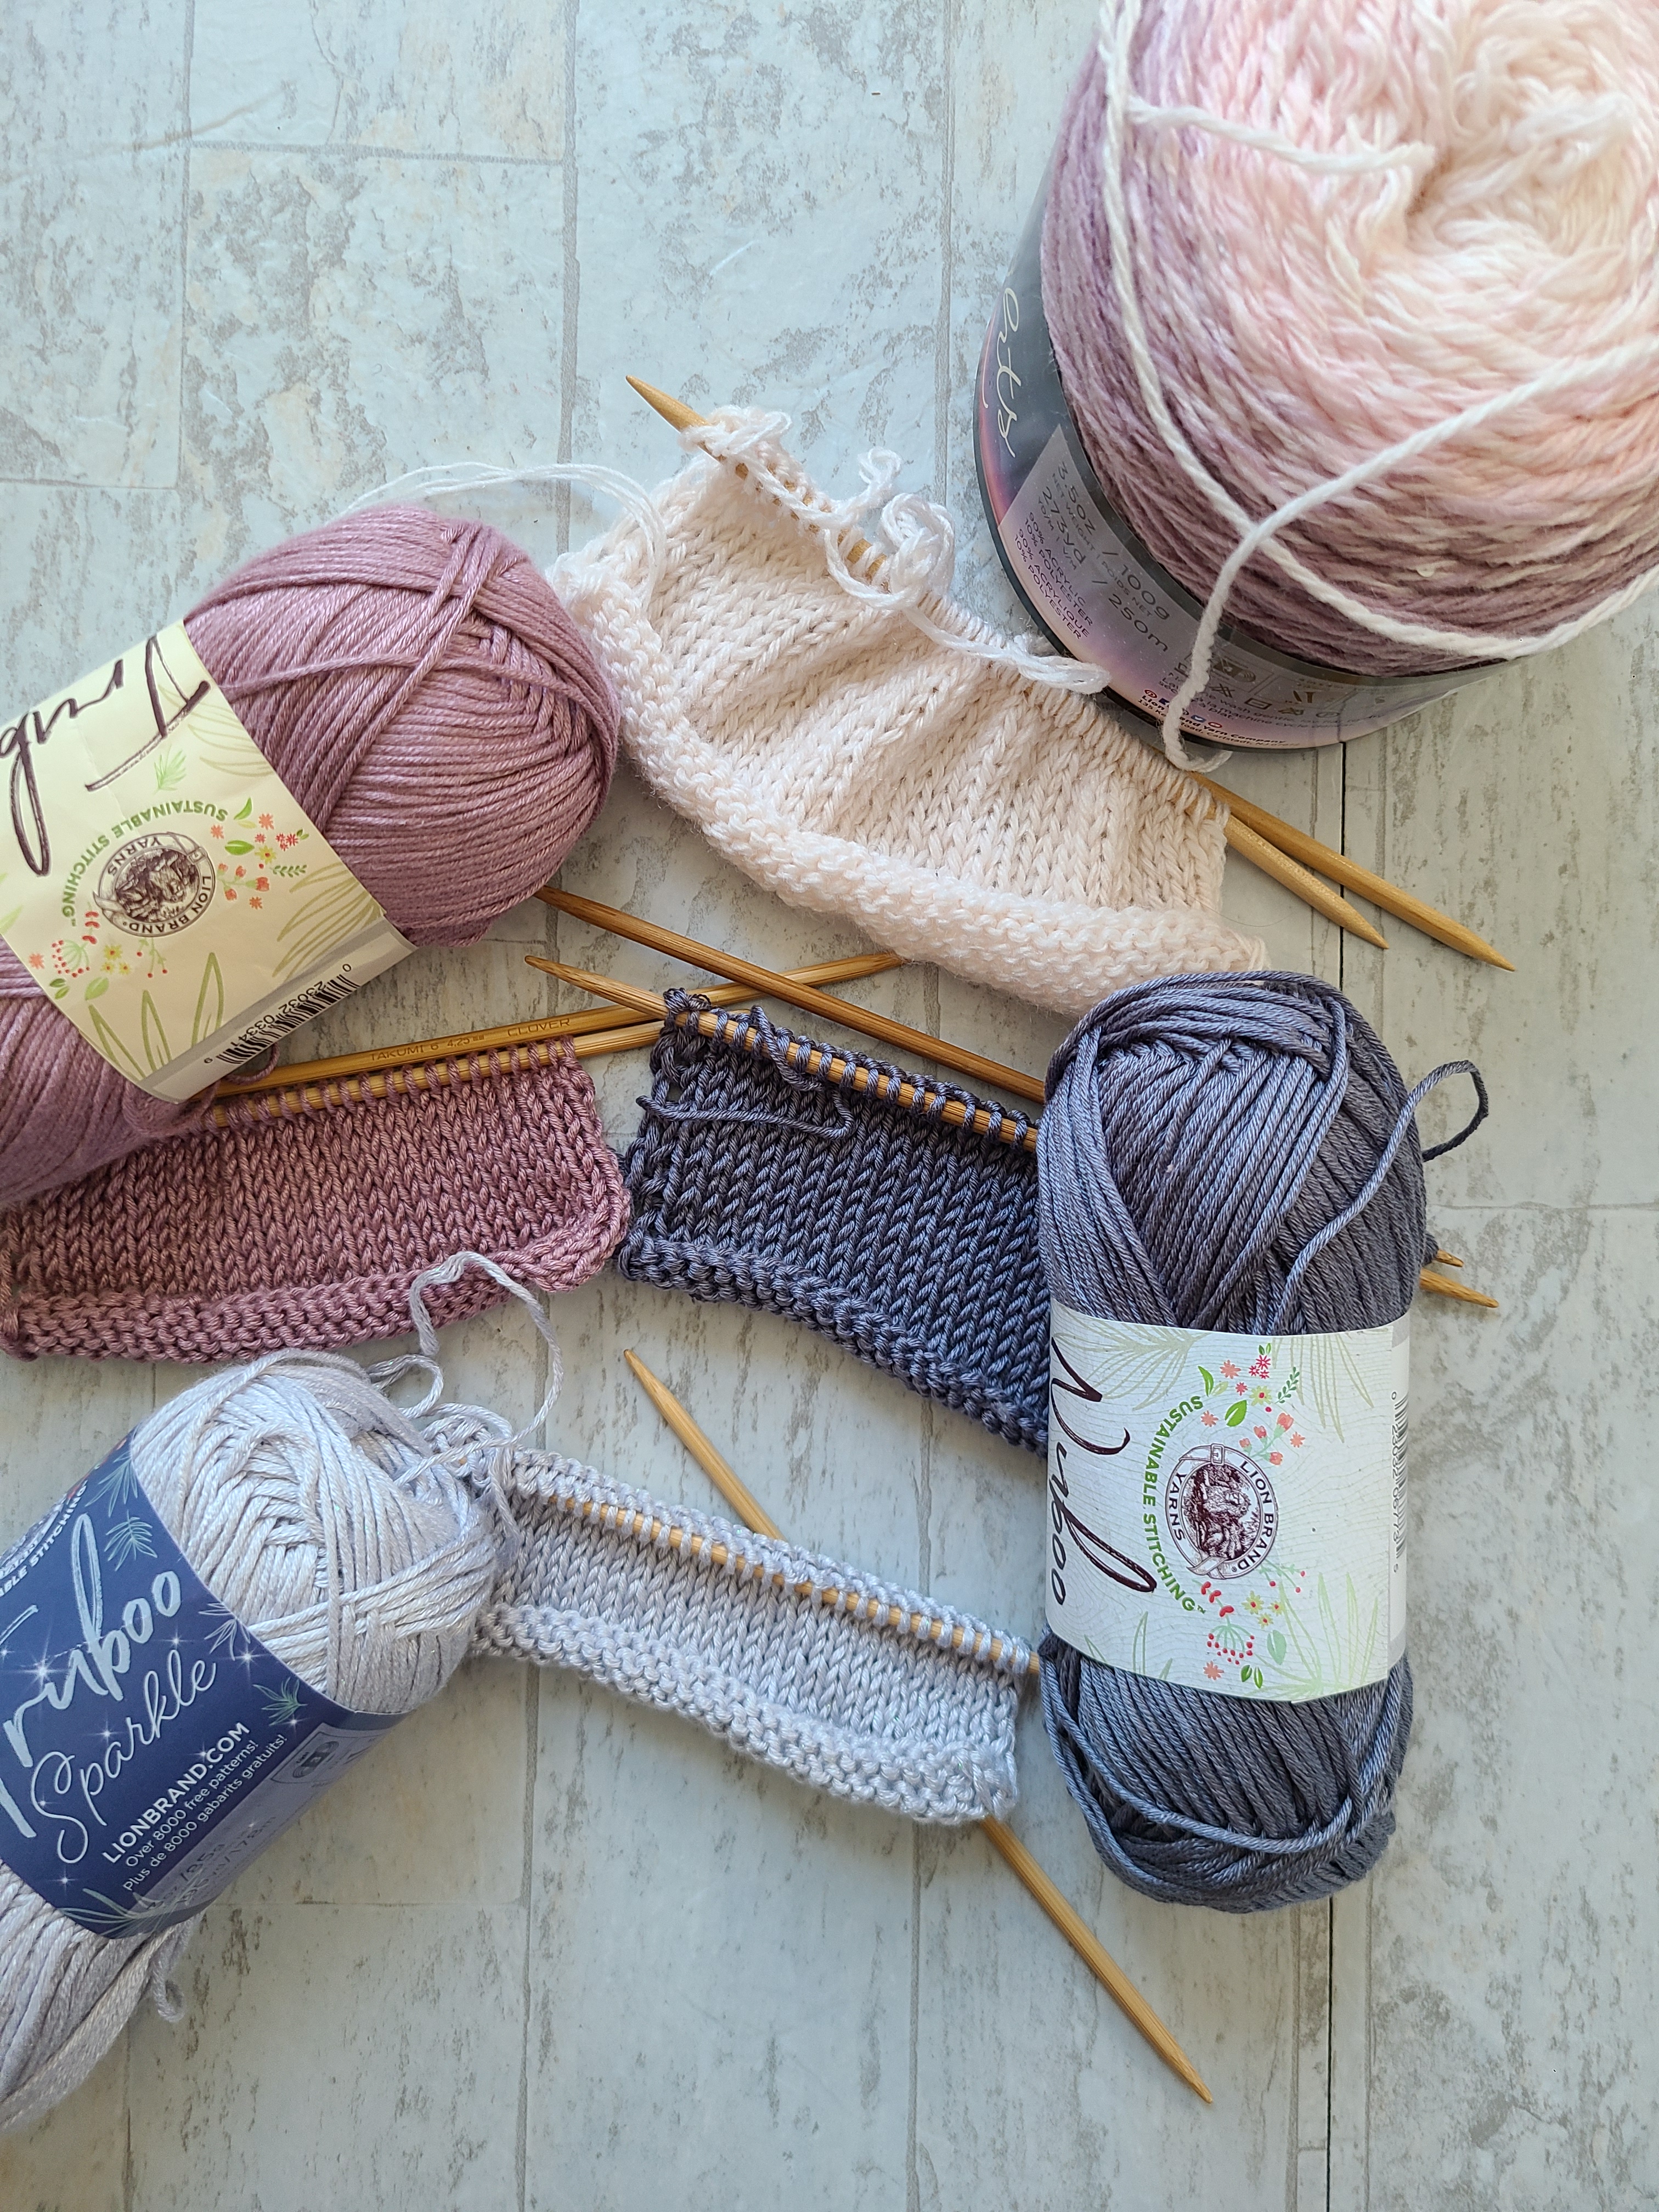 Bamboo, Blends, and New Yarn